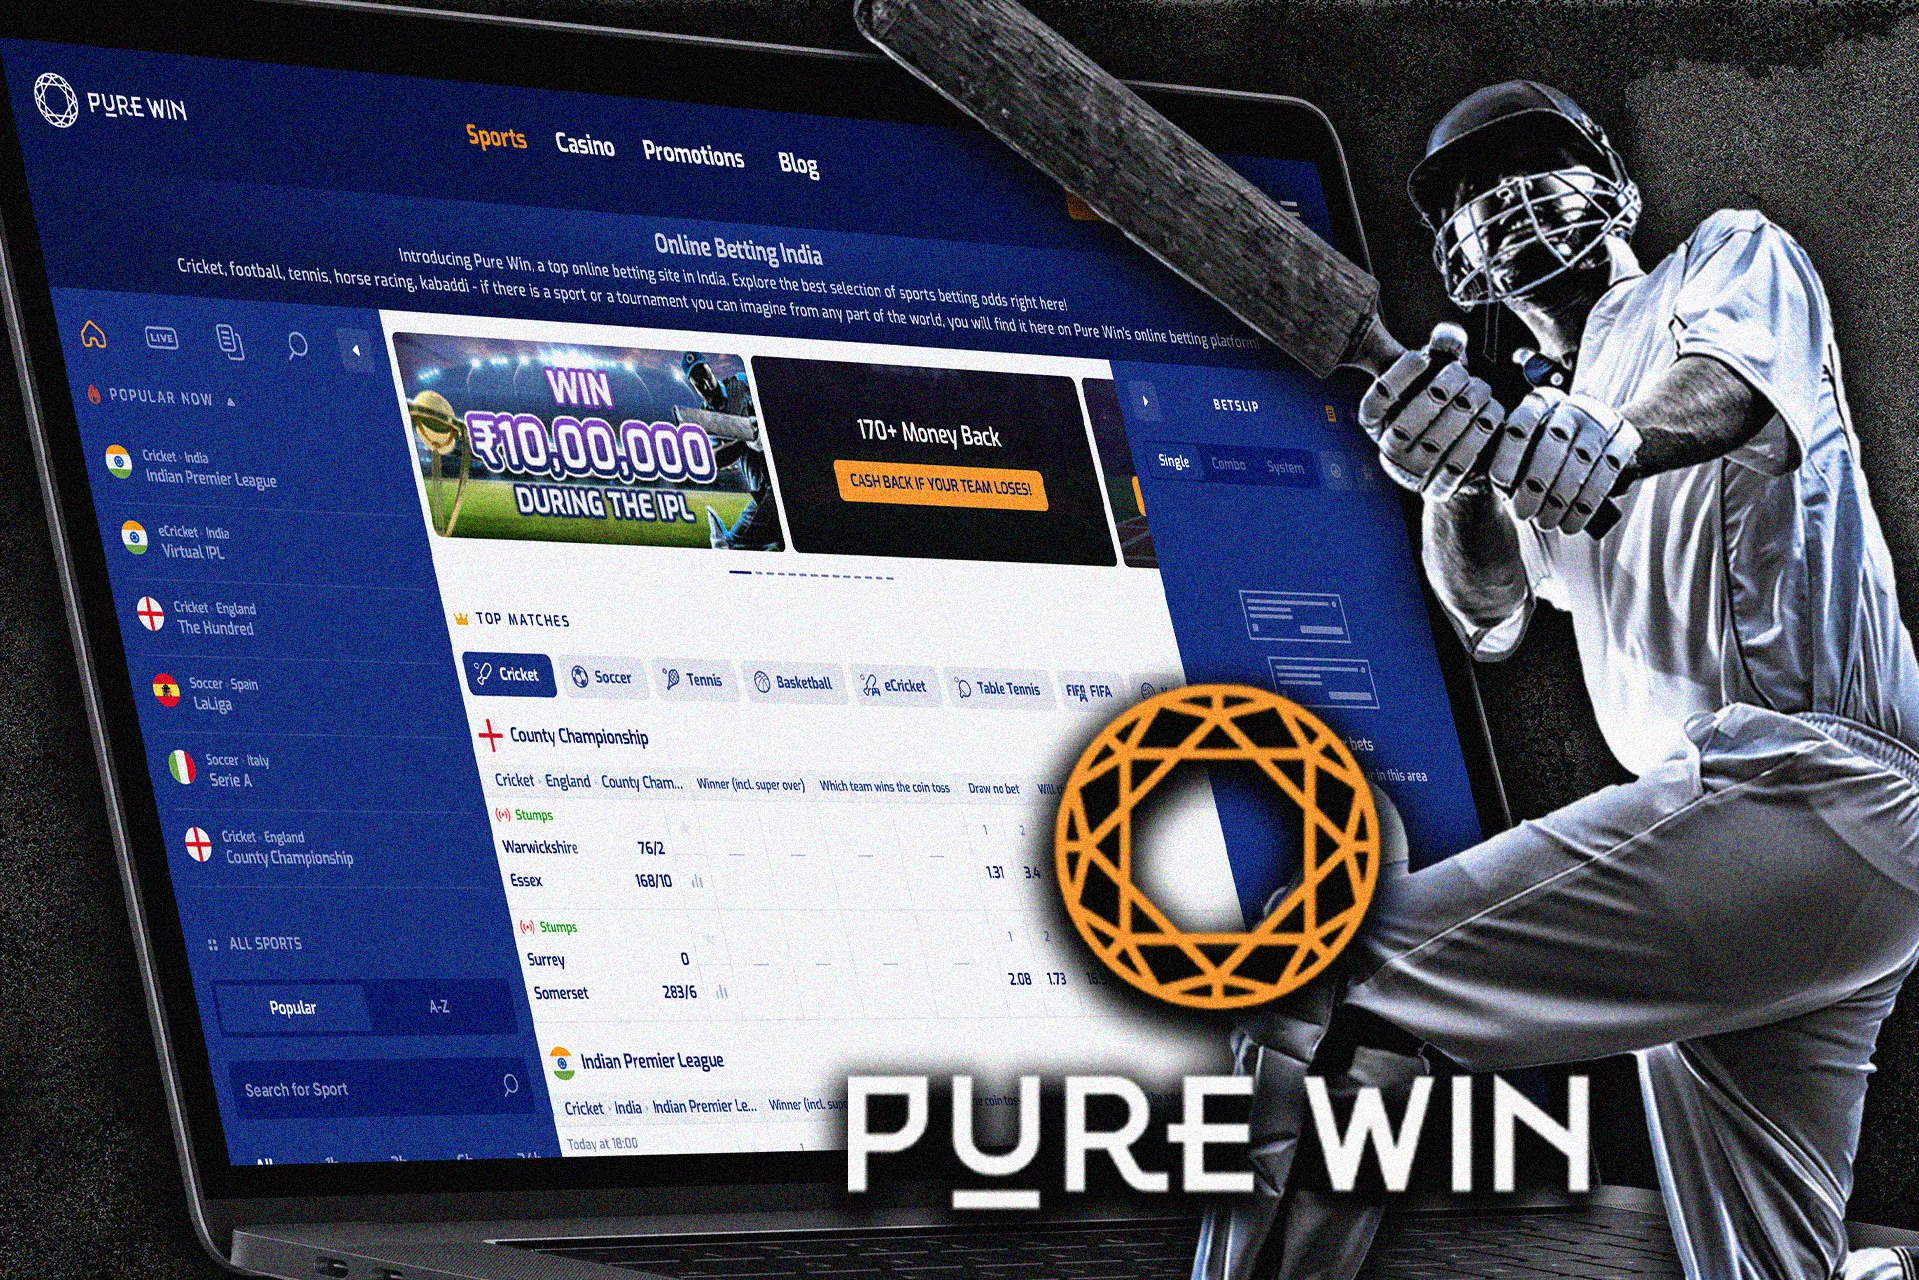 Pure Win official website for cricket betting.